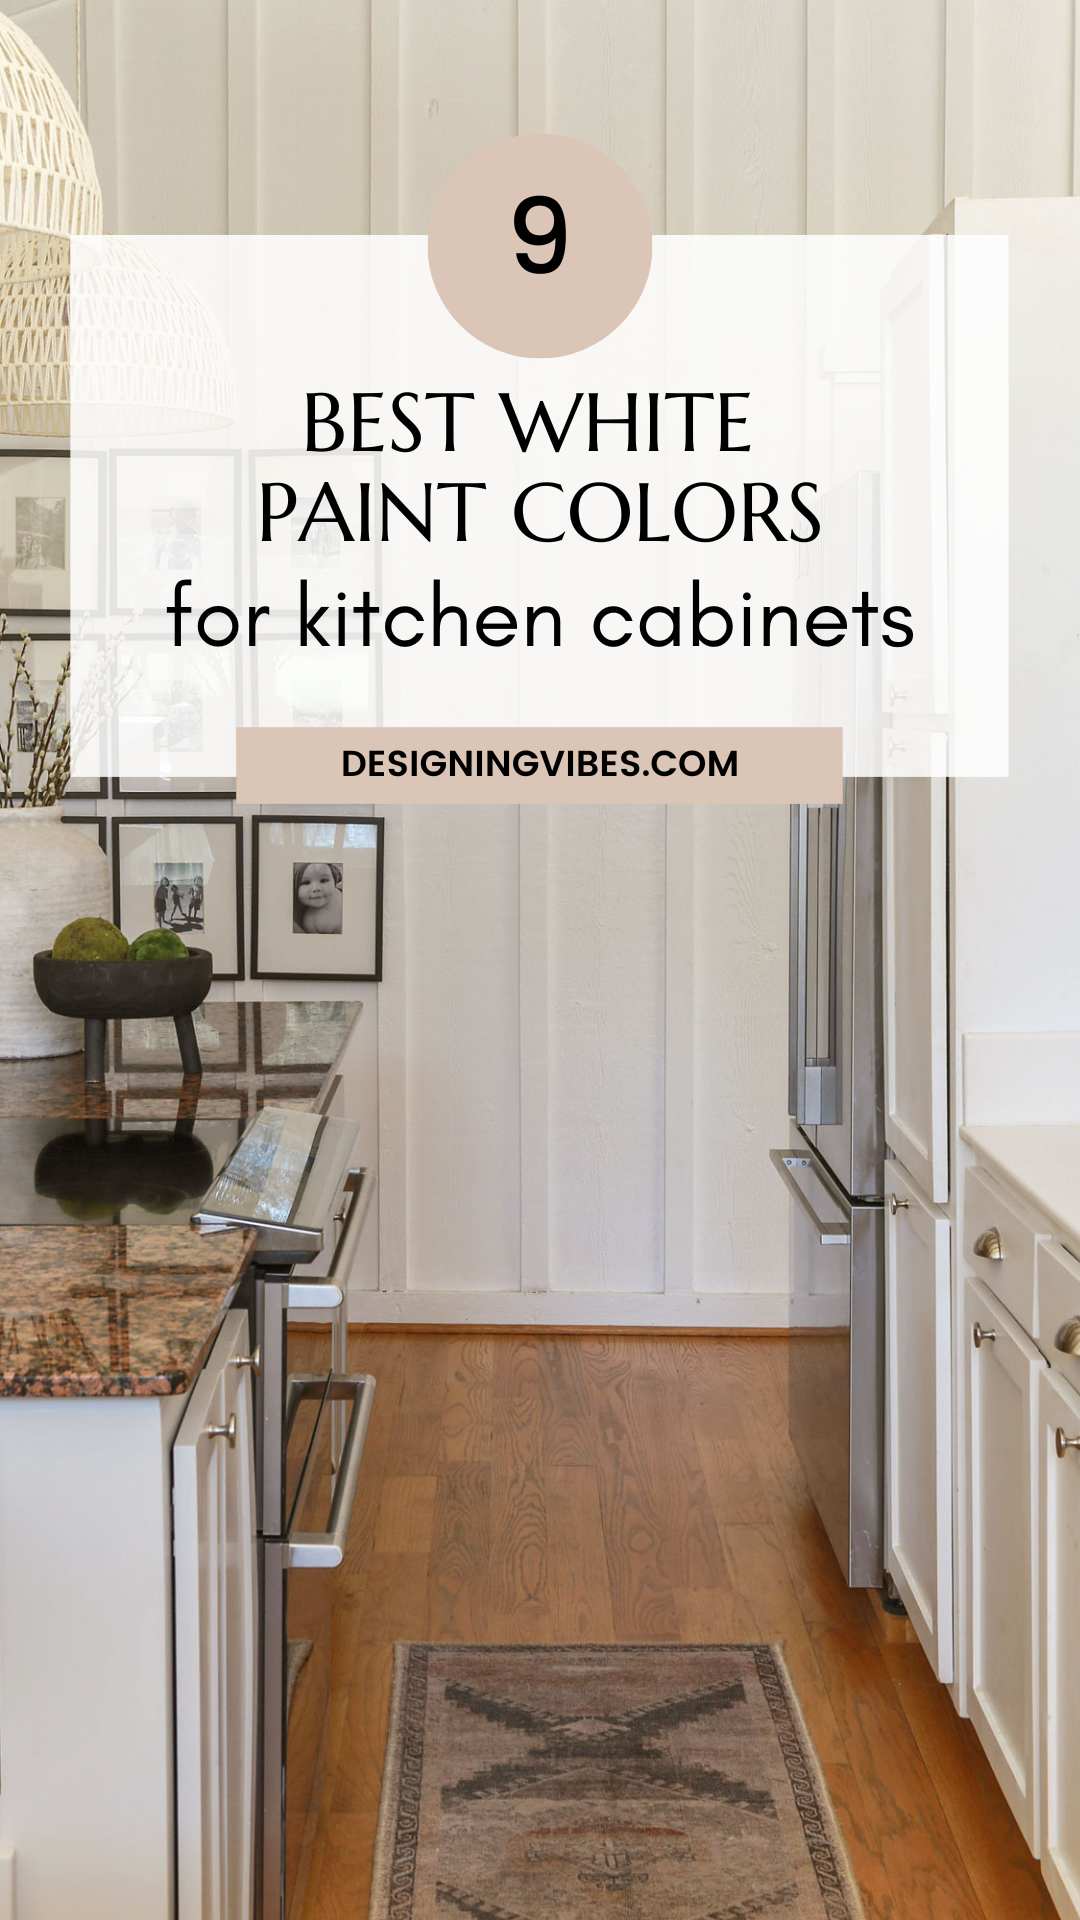 Our Favorite Cabinet Color Trends this Summer